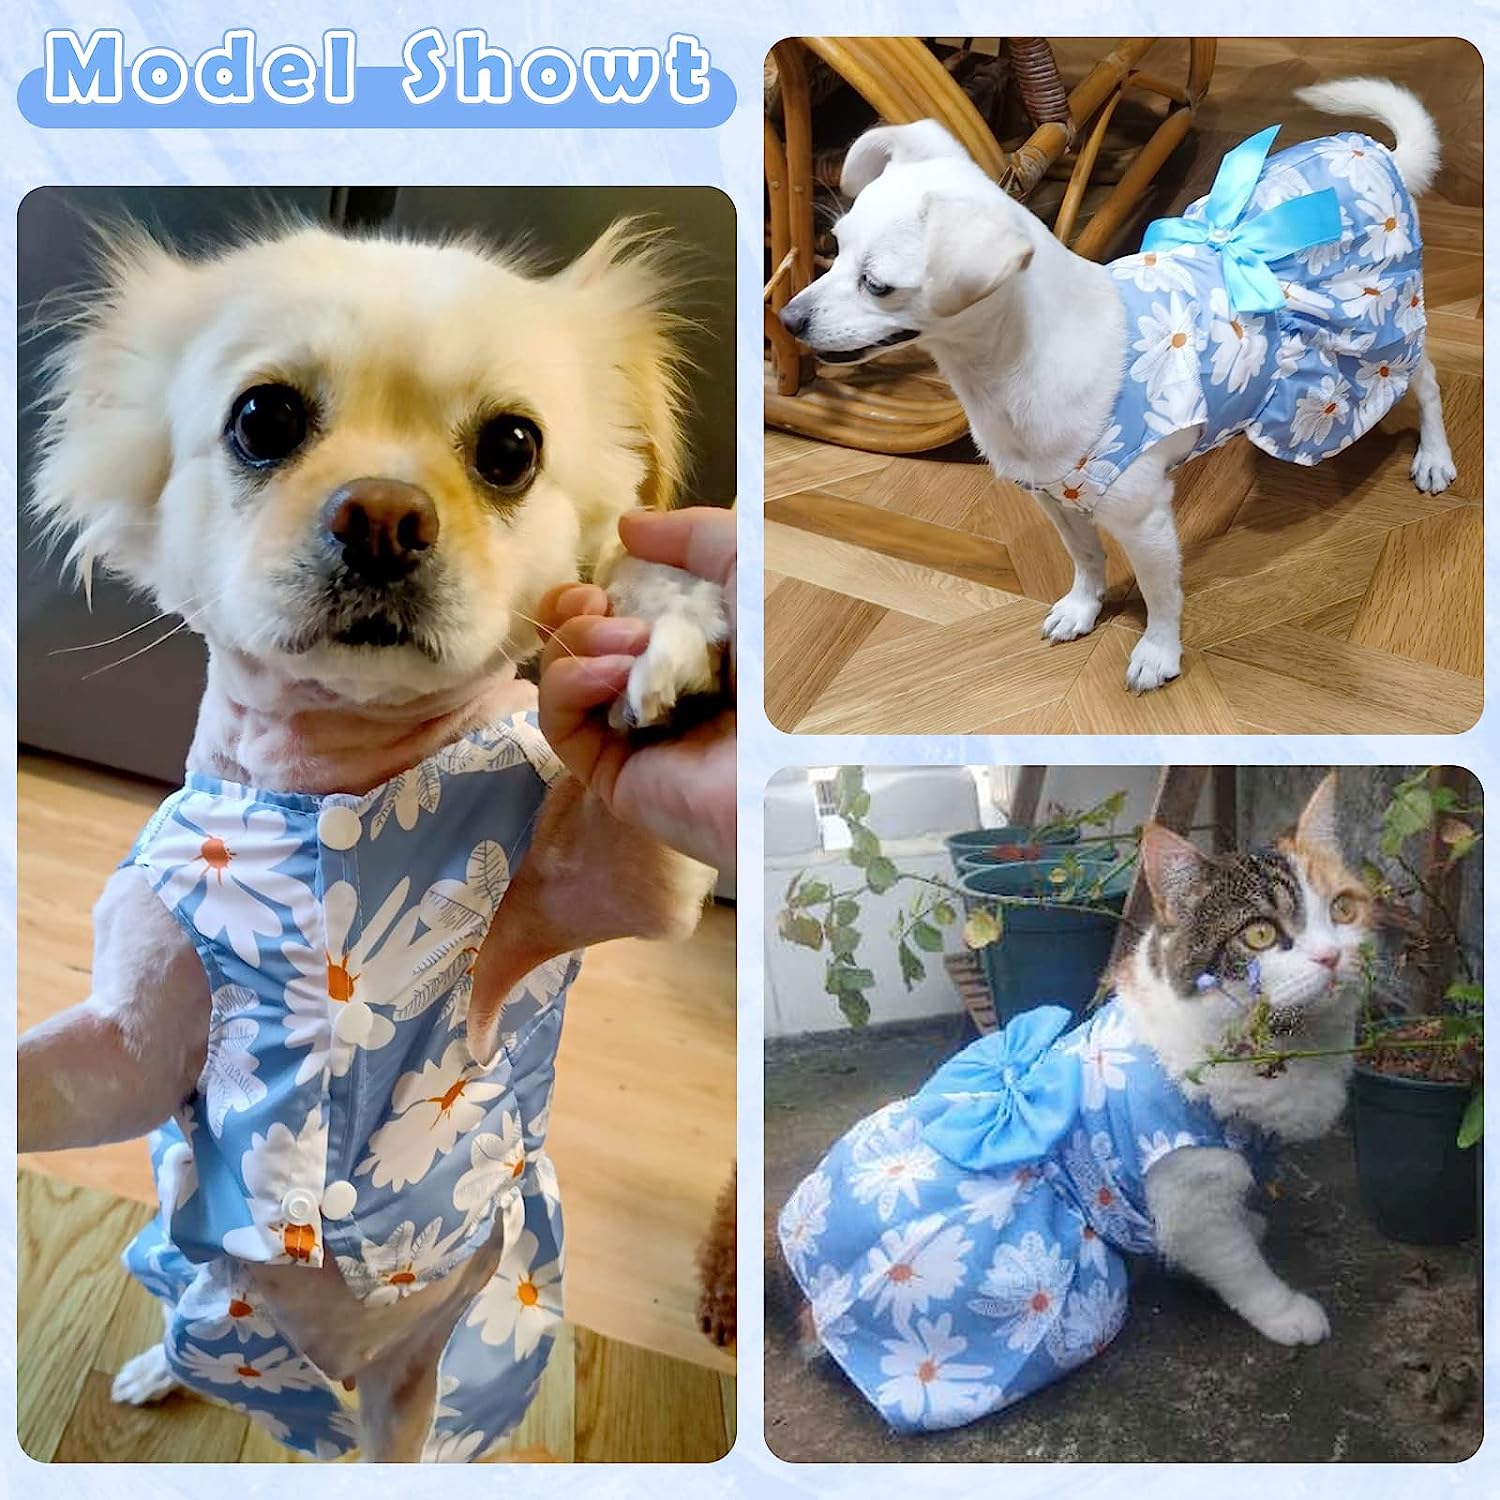 KUTKUT Cute Daisy Pattern Dog Dress with Lovely Bow Pet Apparel Dog Clothes for Small Dogs and Cats | Puppy Summer Dress Birthday Pet Apparel Dress ( Blue ) - kutkutstyle